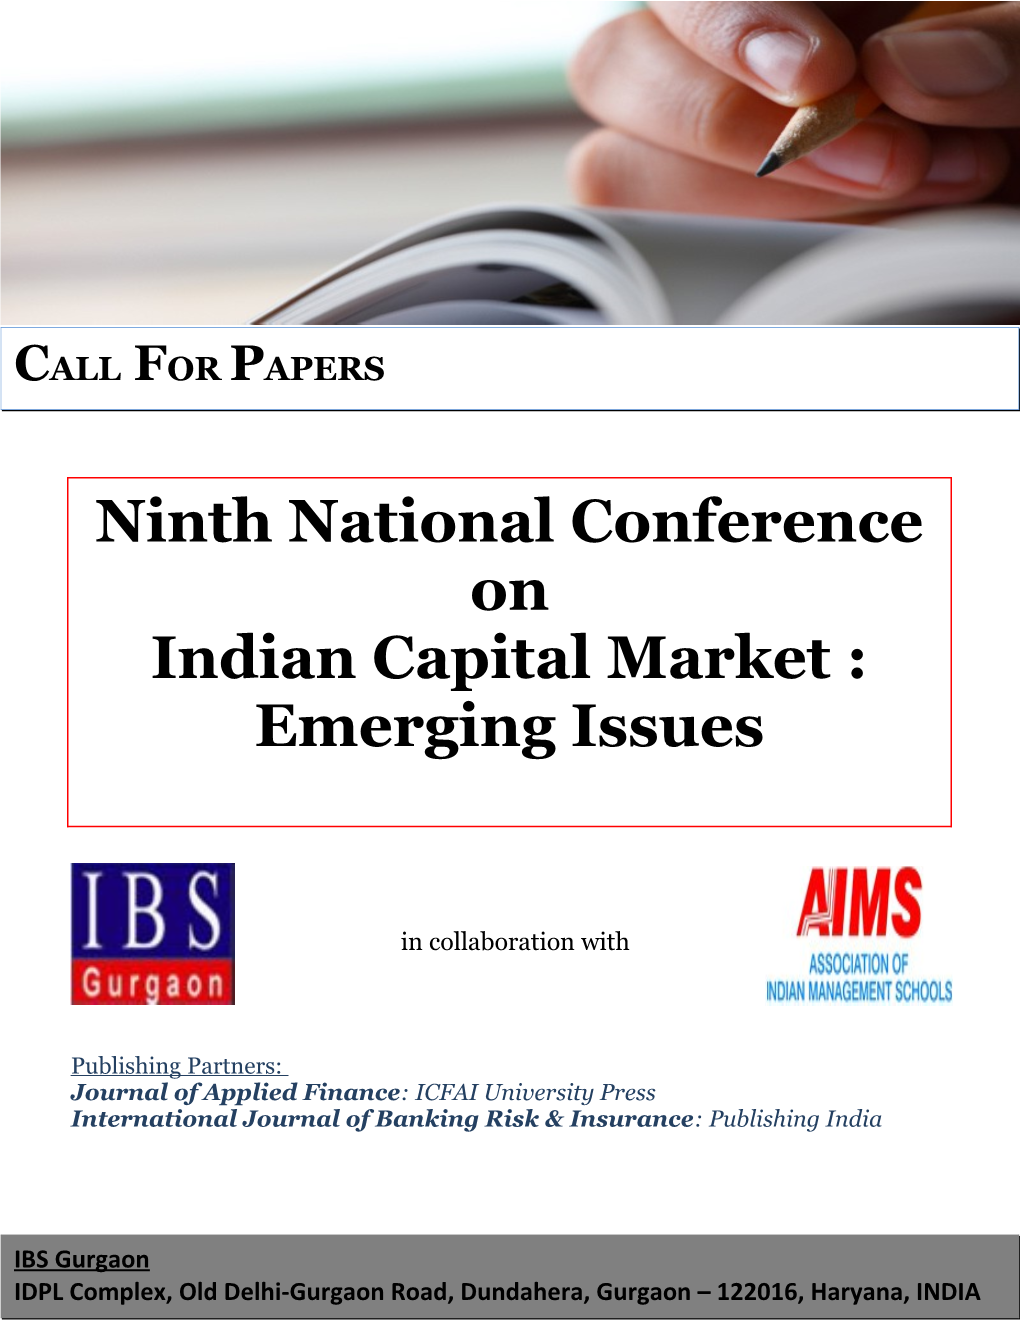 Ninth National Conference on Indian Capital Market : Emerging Issues